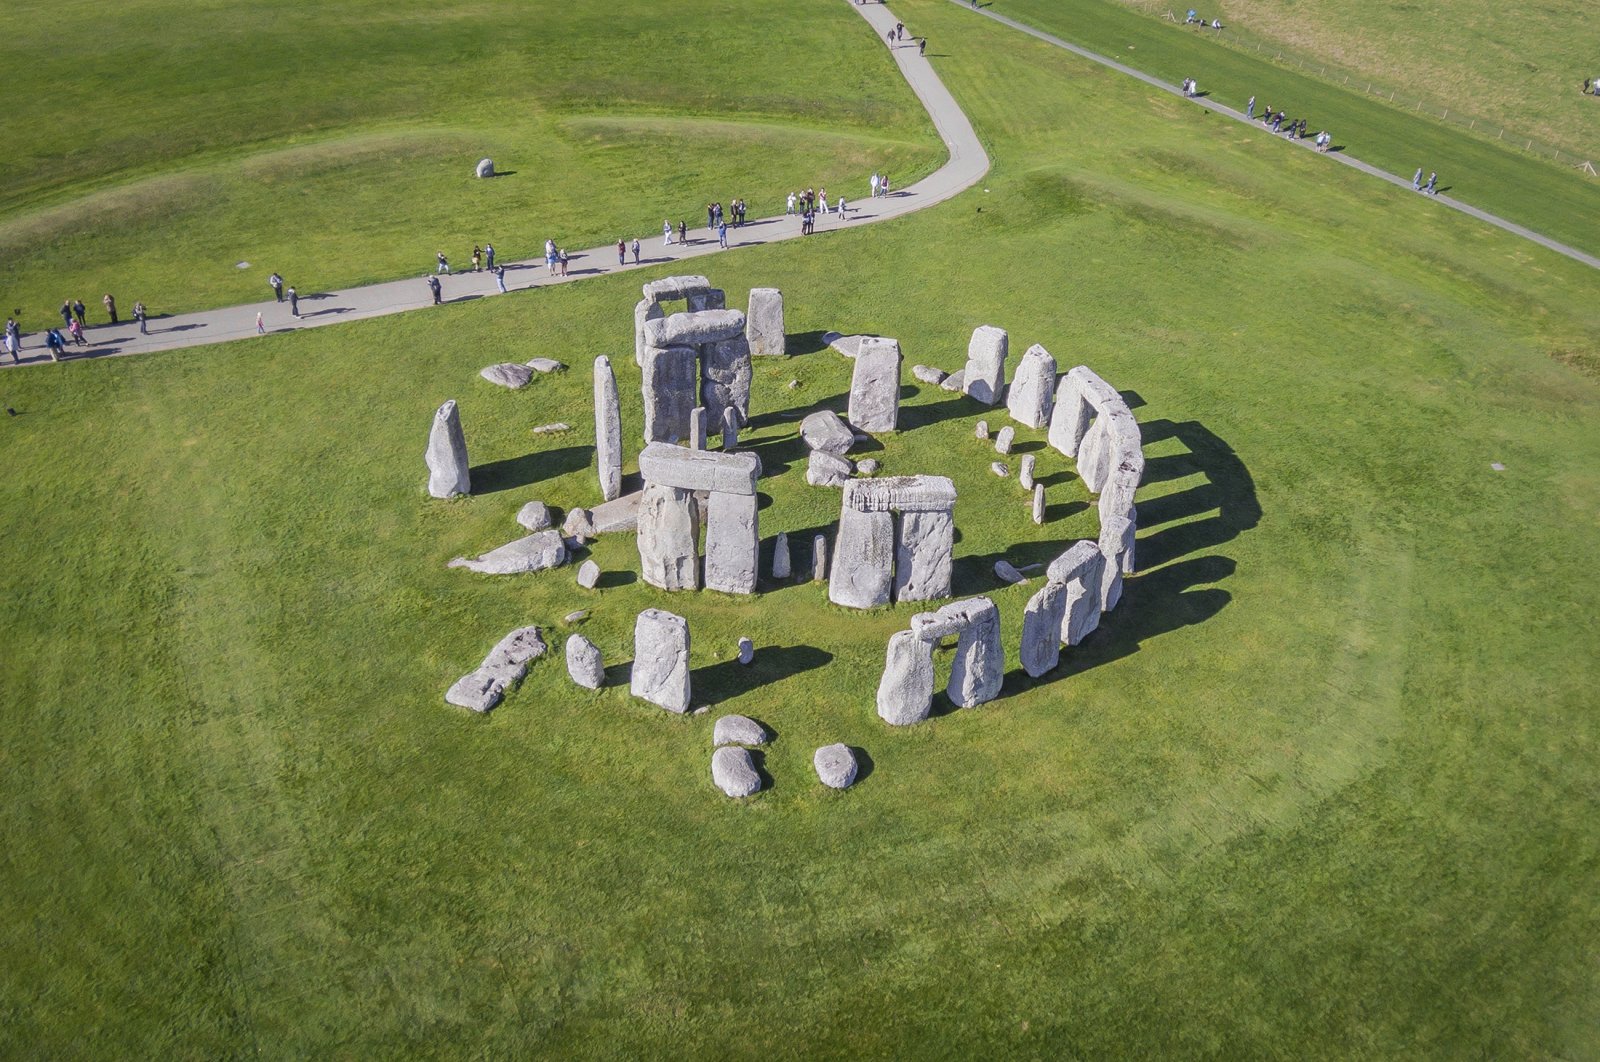 An aerial view shows the monumental megaliths of UNESCO World Heritage Site Stonehenge, in Amesbury, Wiltshire, United Kingdom, Oct. 3, 2016. (Shutterstock Photo)